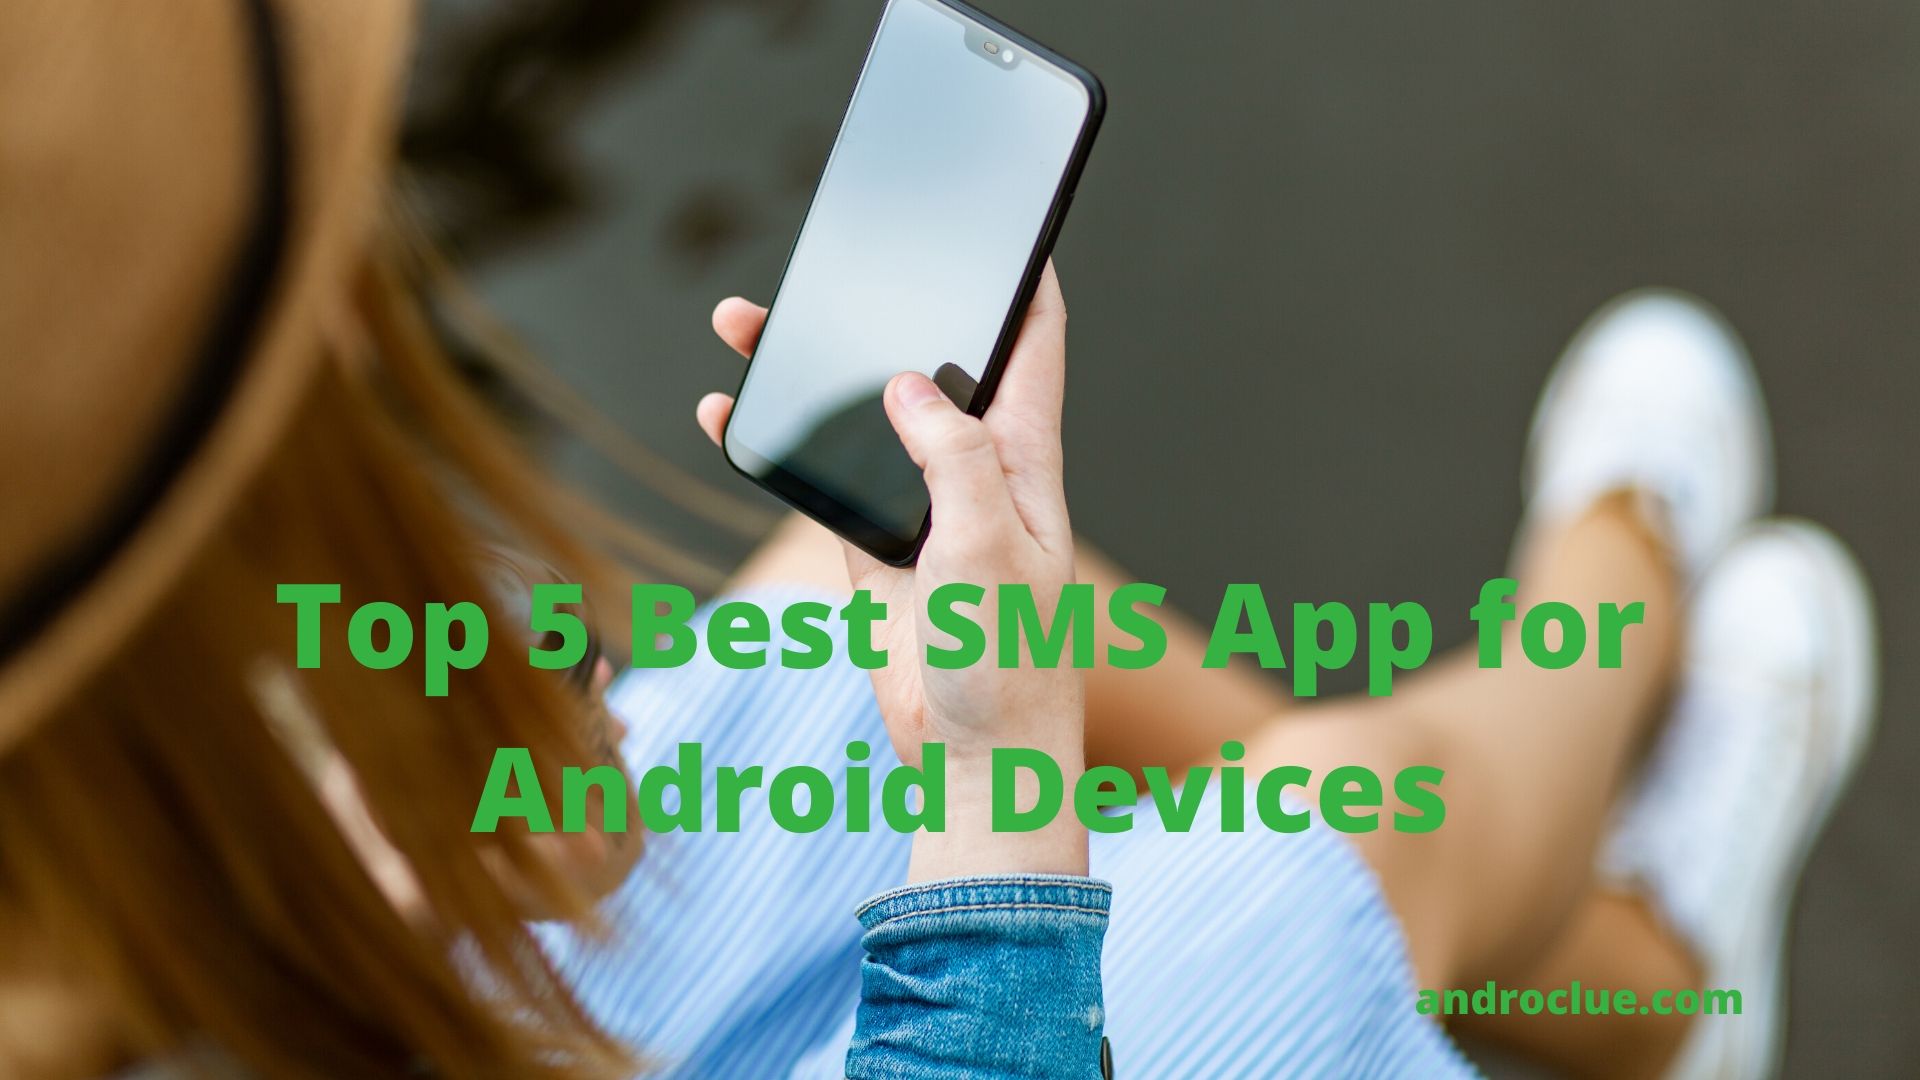 Top 5 Best SMS App for Android Devices to Use in 2020 (Free Edition)